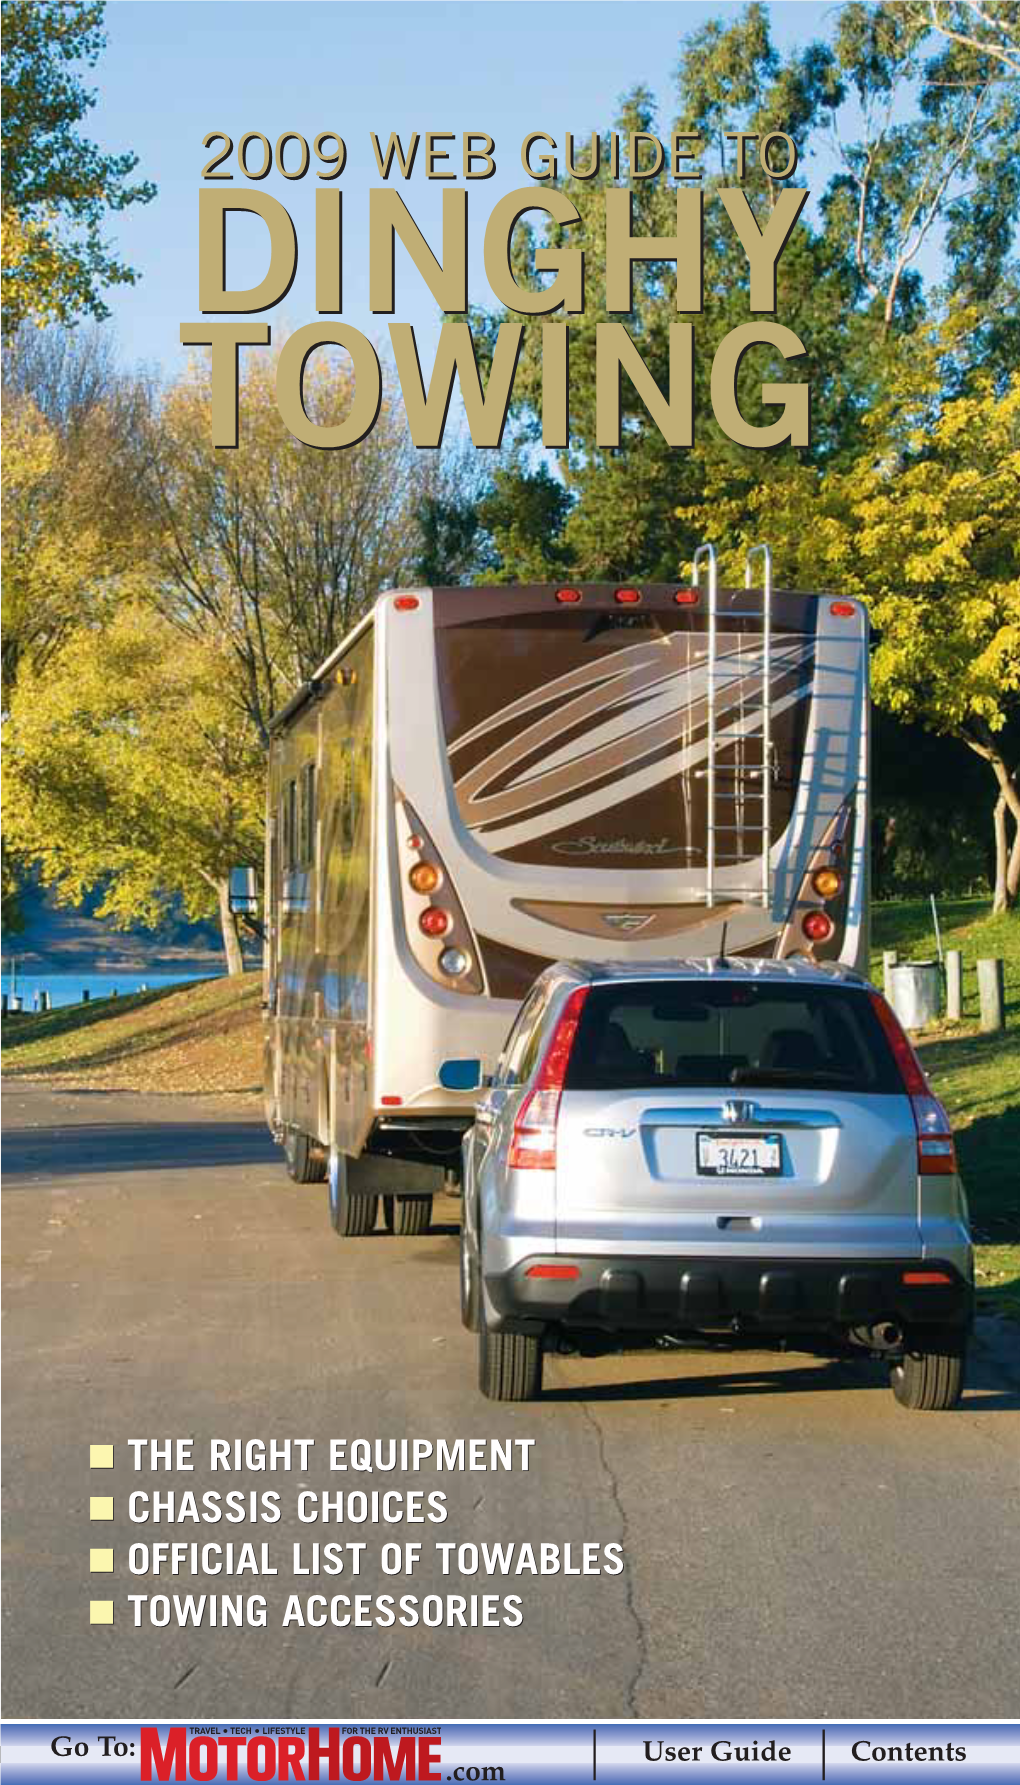 2009 Web Guide to Dinghy Towing Iprovides a Selection of Informative Articles and a Listing of New Vehicles Ready-Made to Enhance Your Rving Lifestyle